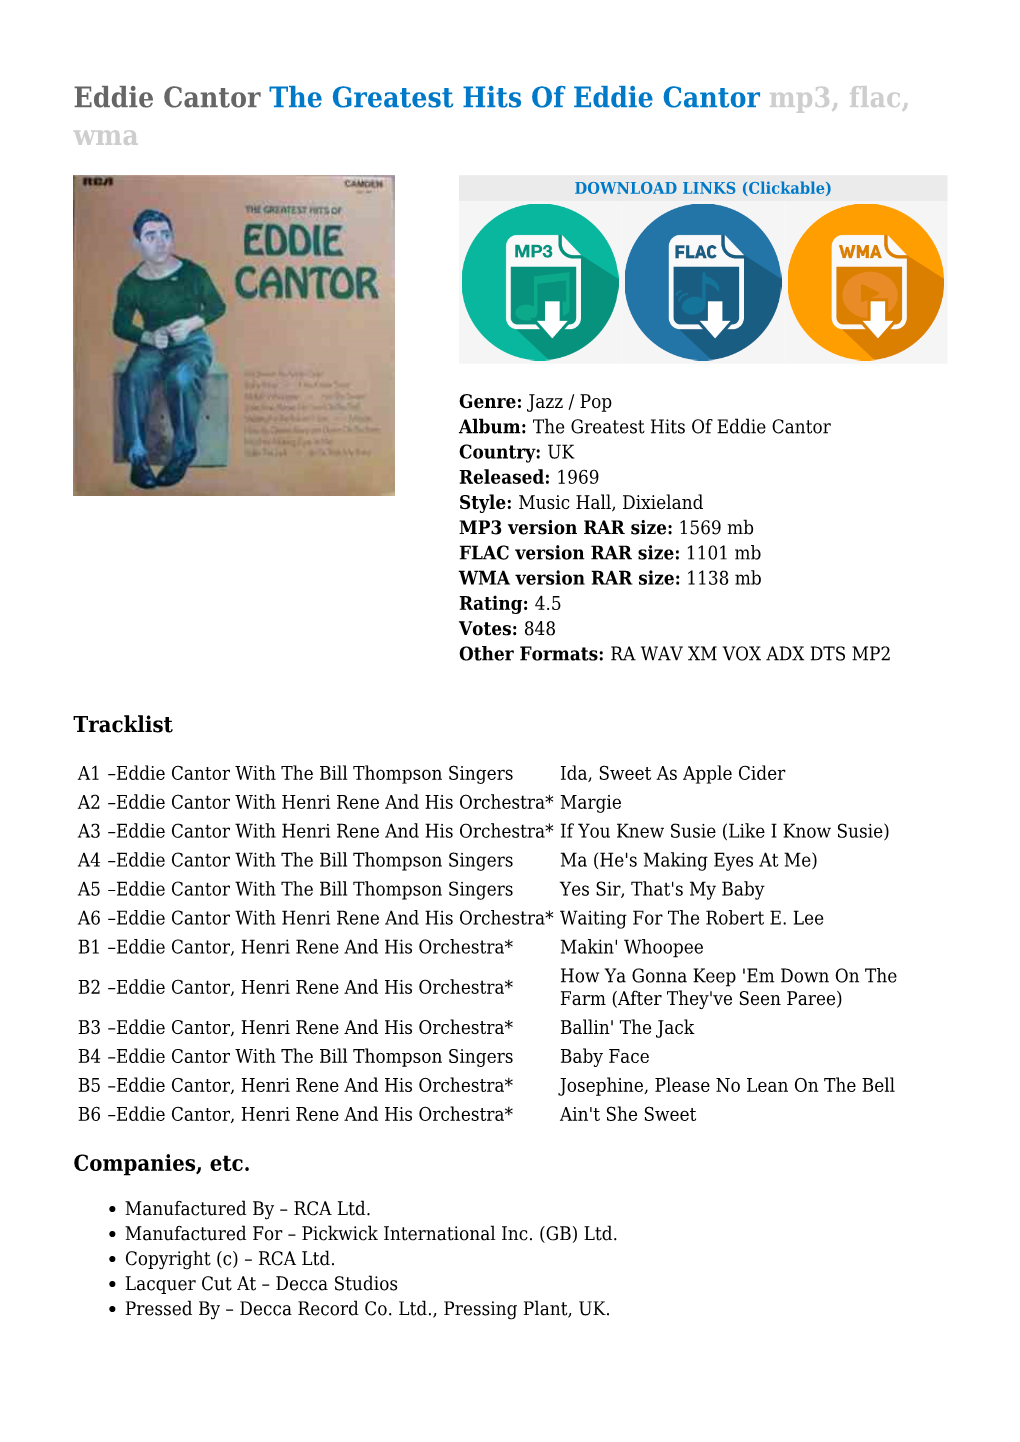 The Greatest Hits of Eddie Cantor Mp3, Flac, Wma